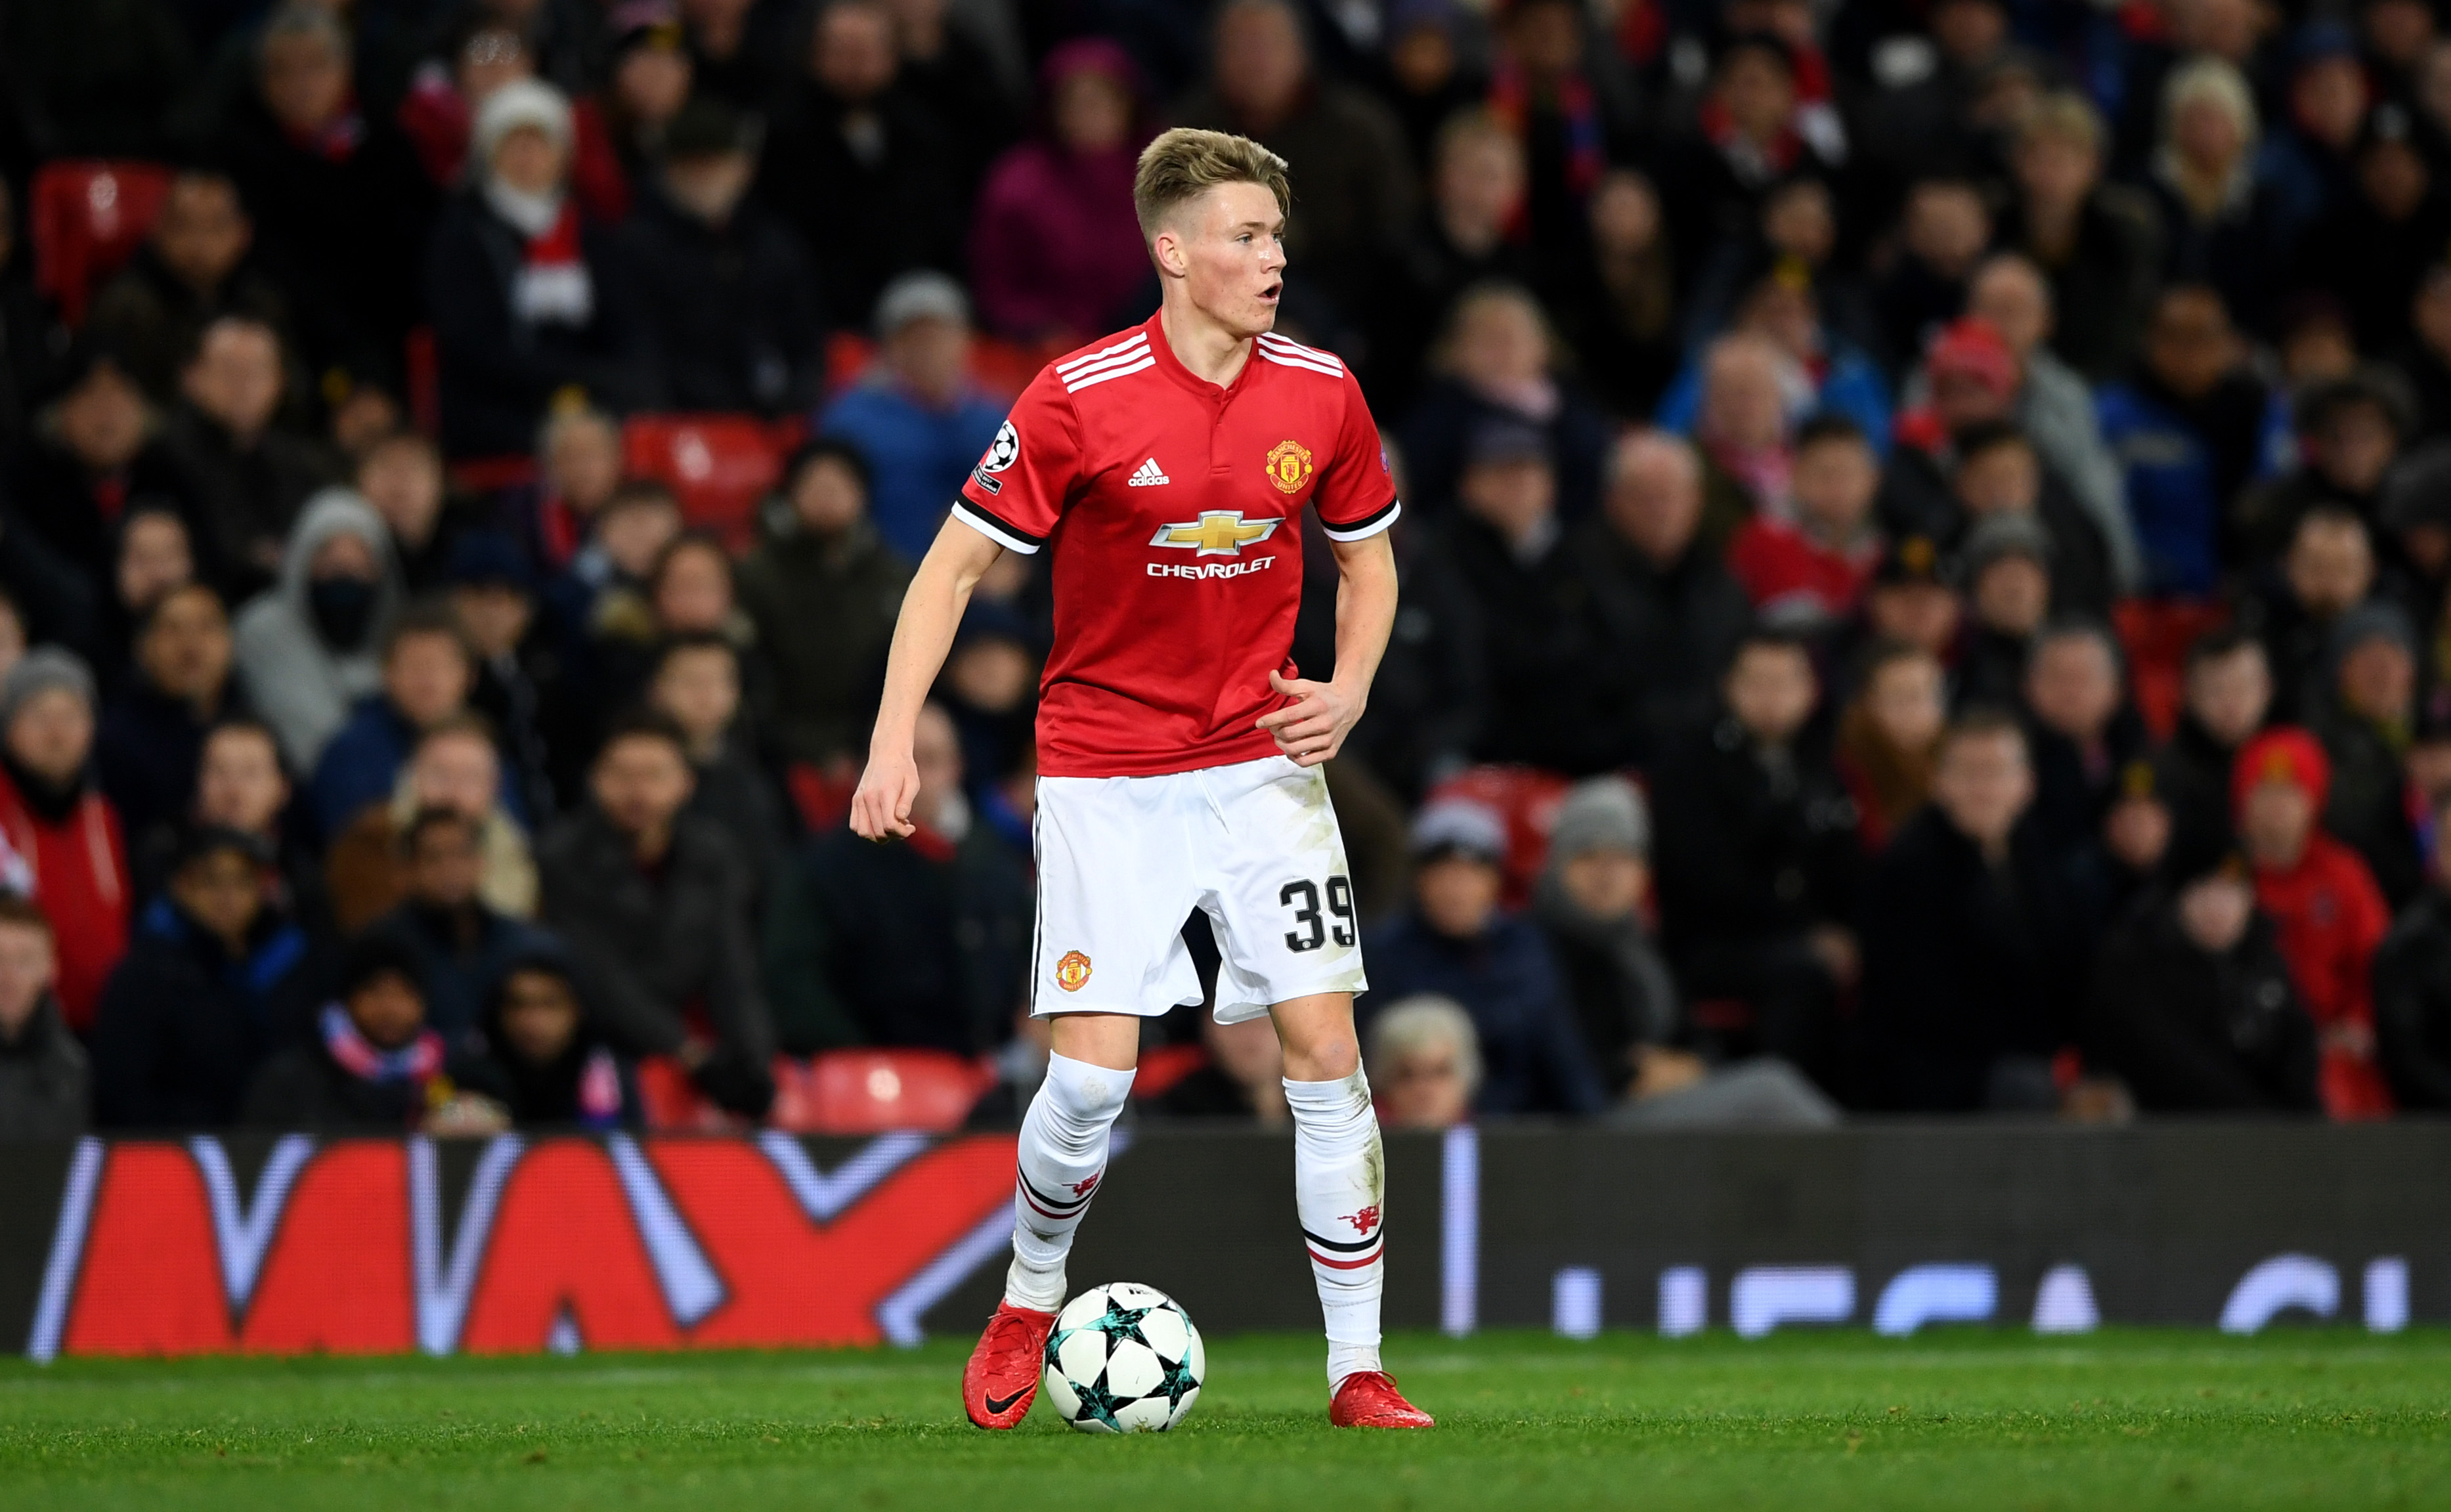 Scott McTominay of Manchester United during the UEFA Champions League group A match between Manchester United and CSKA Moskva at Old Trafford on December 5, 2017 in Manchester, United Kingdom.  (Photo by Gareth Copley/Getty Images)